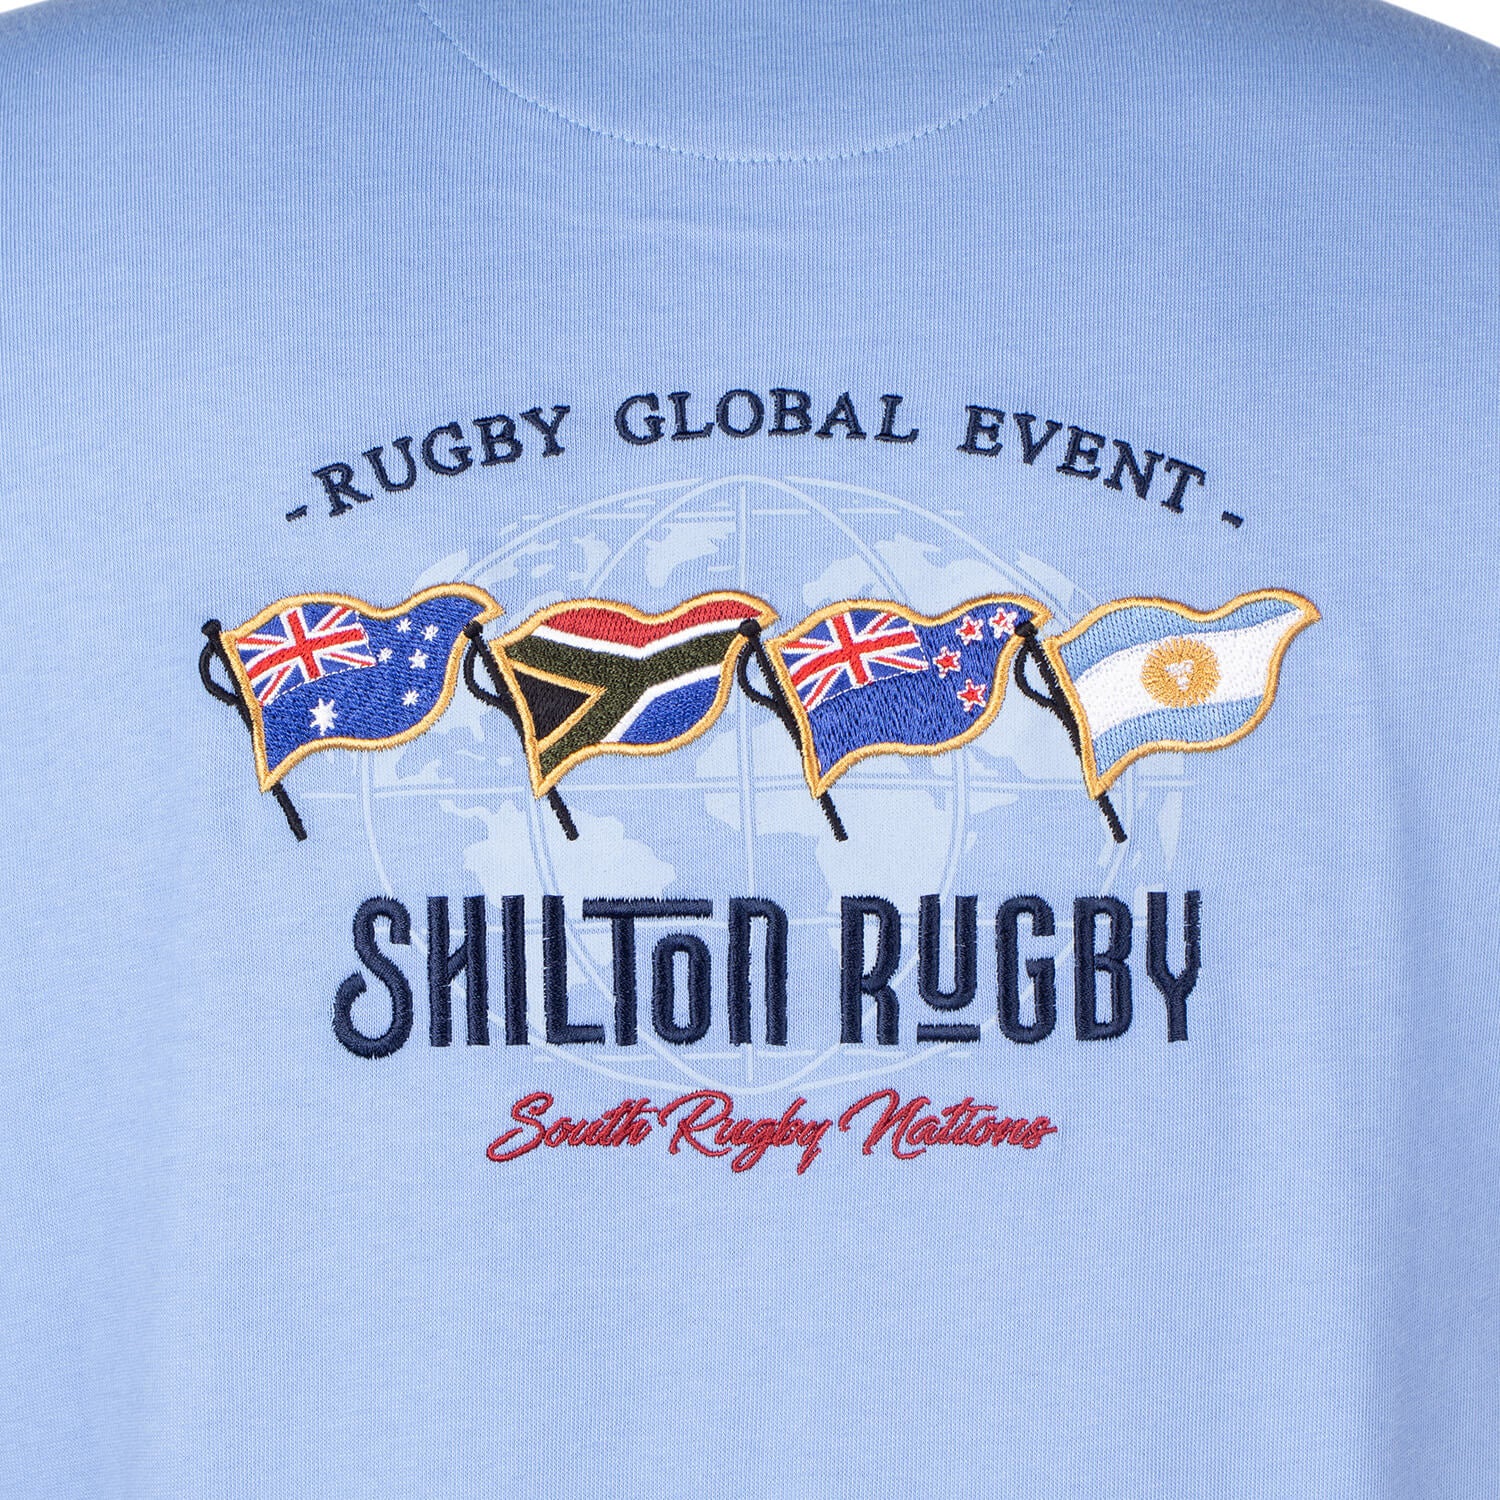 Polo South Rugby Nations Ciel